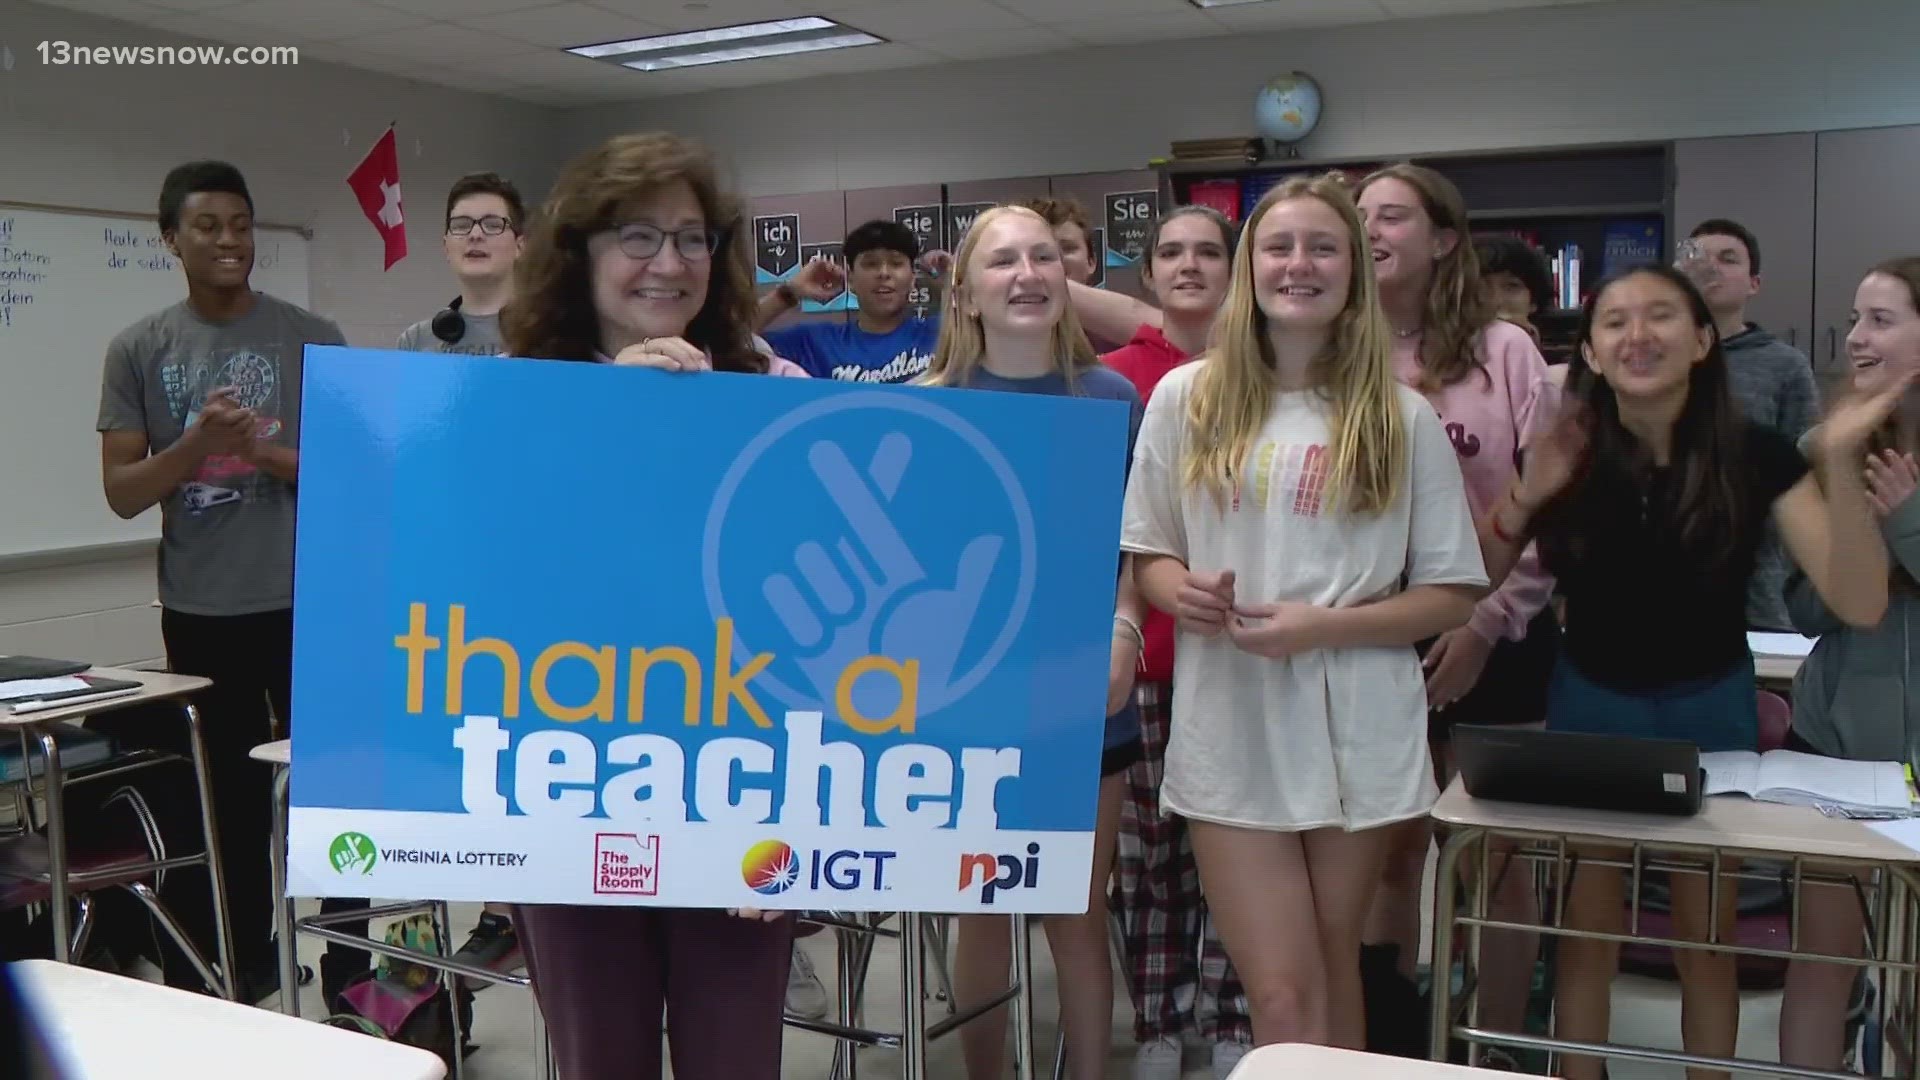 Amy Hertzler won a free vacation from the Virginia Lottery! It's part of its "Thank-A-Teacher" campaign.